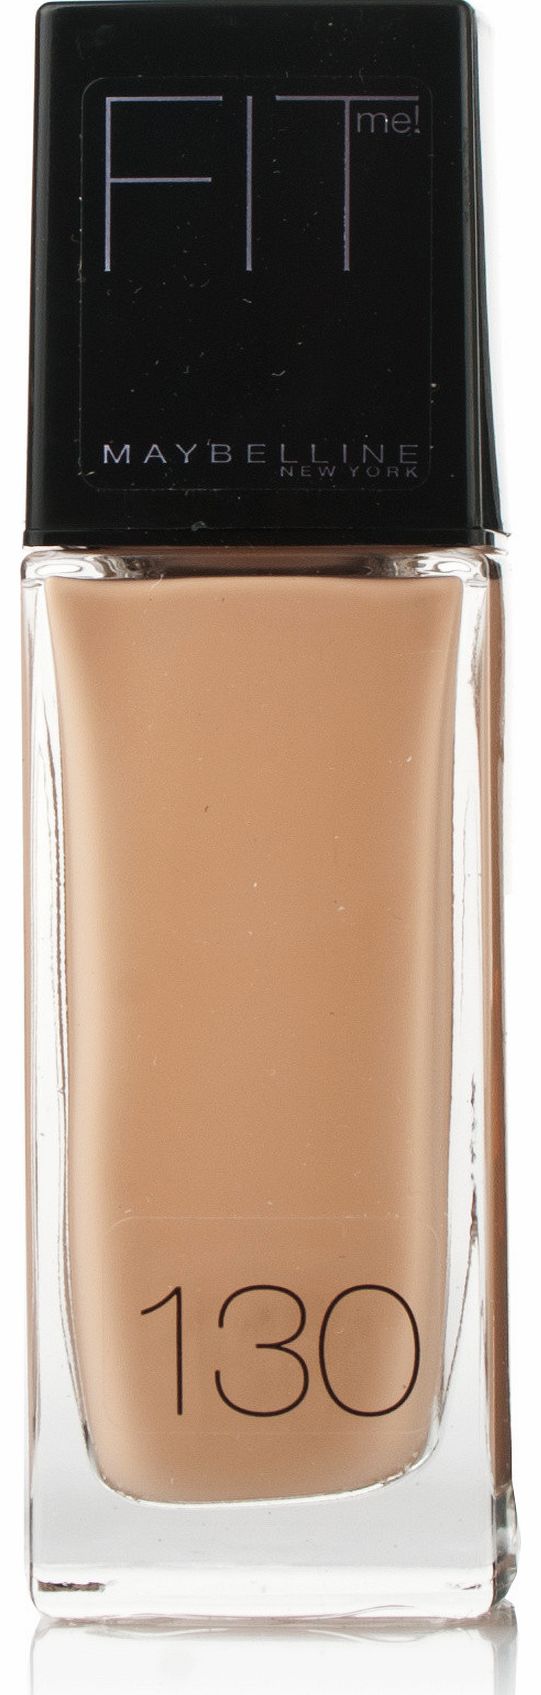 Maybelline Fit Me Foundation Buff Beige